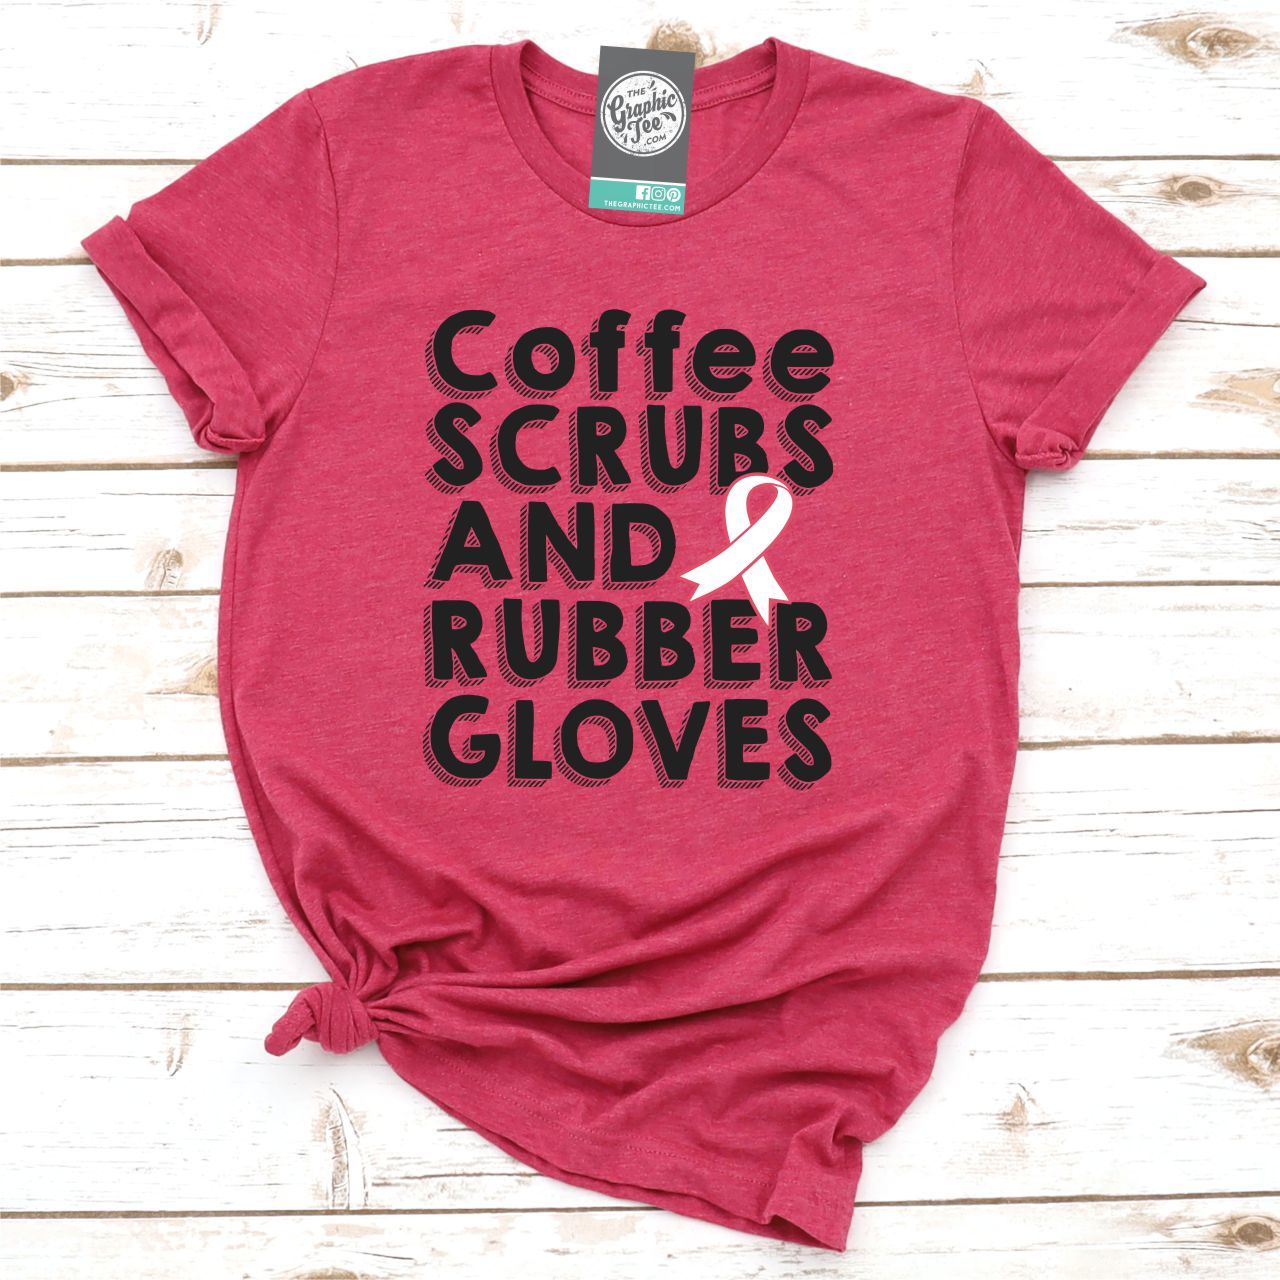 Coffee, Scrubs and Rubber Gloves - Unisex Tee - The Graphic Tee